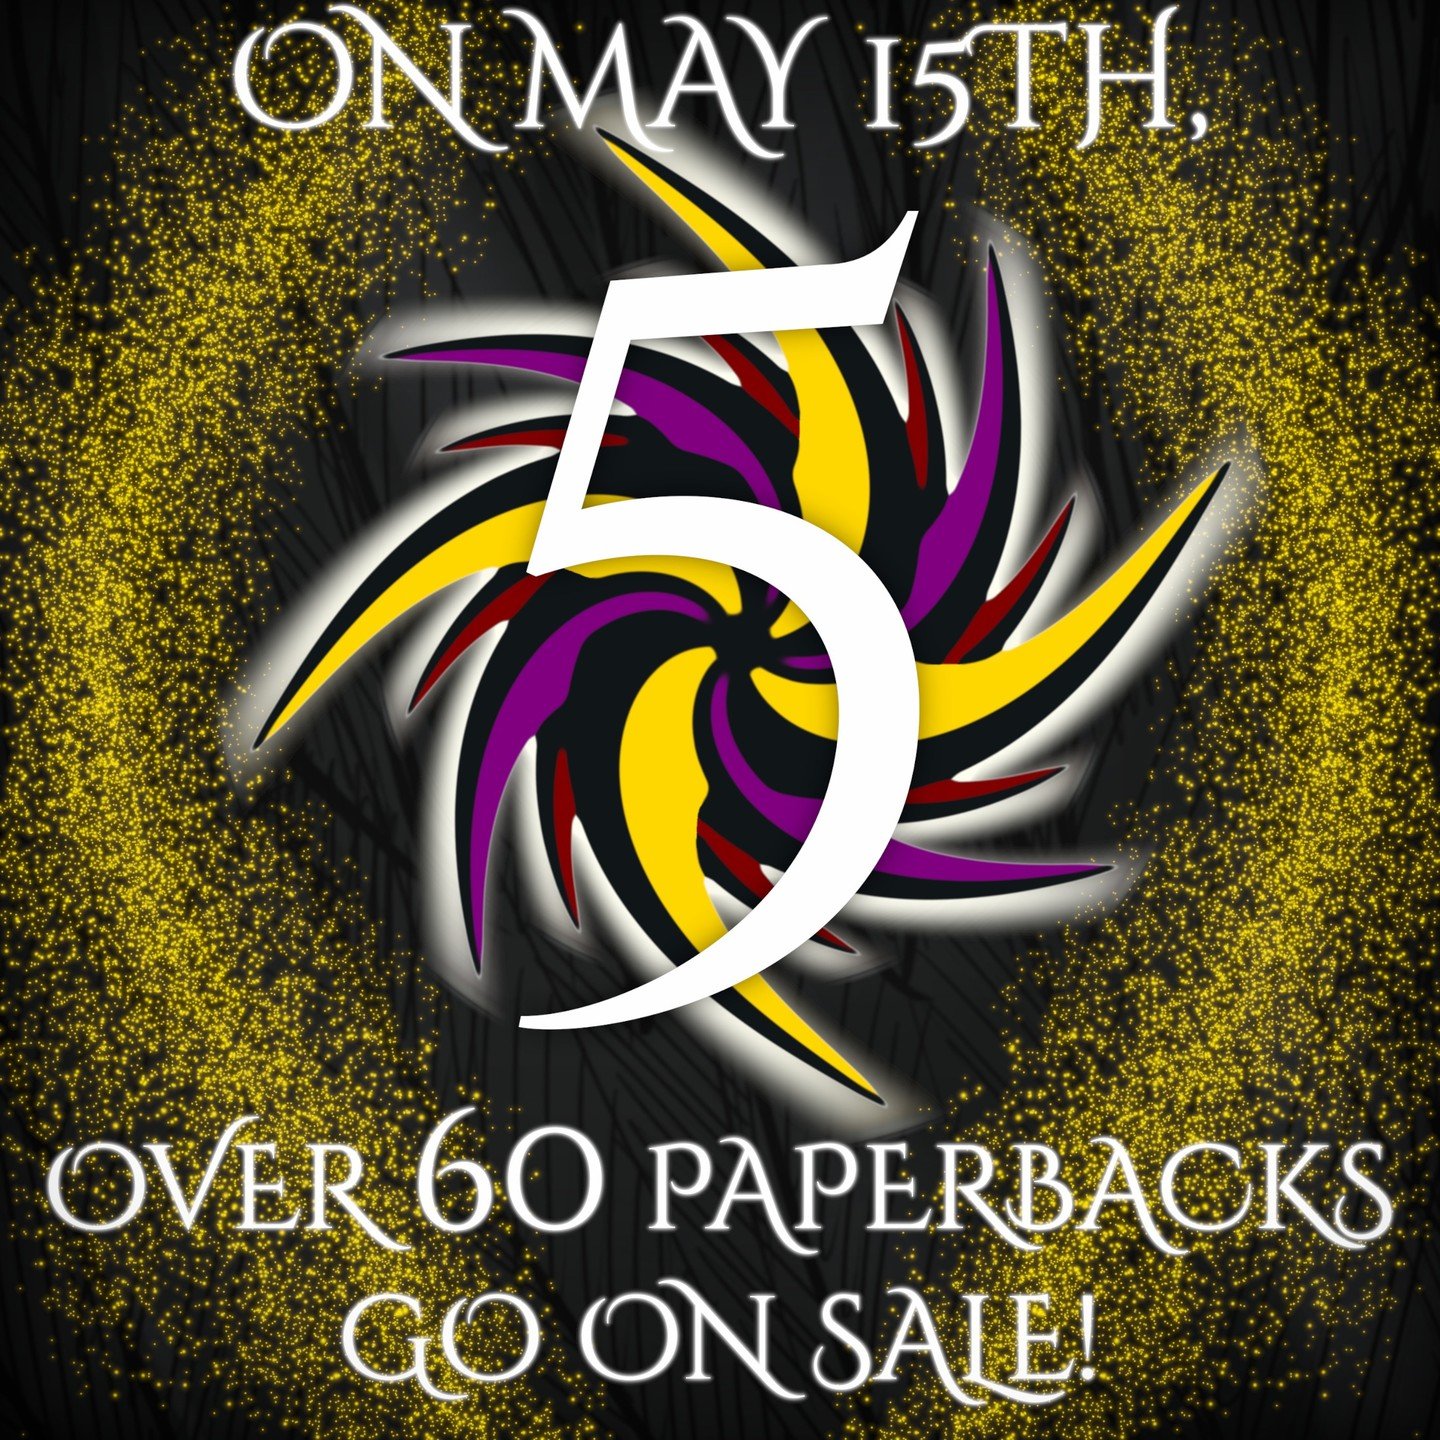 We've had some sales in the past, but never anything like this!

We had to do something extra special, you know?

On May 15th, over 60 Shadow Spark paperbacks will go on sale! 

If you're a fan of physical books -- get HYPED! 🎉

#ShadowSparkPublishi